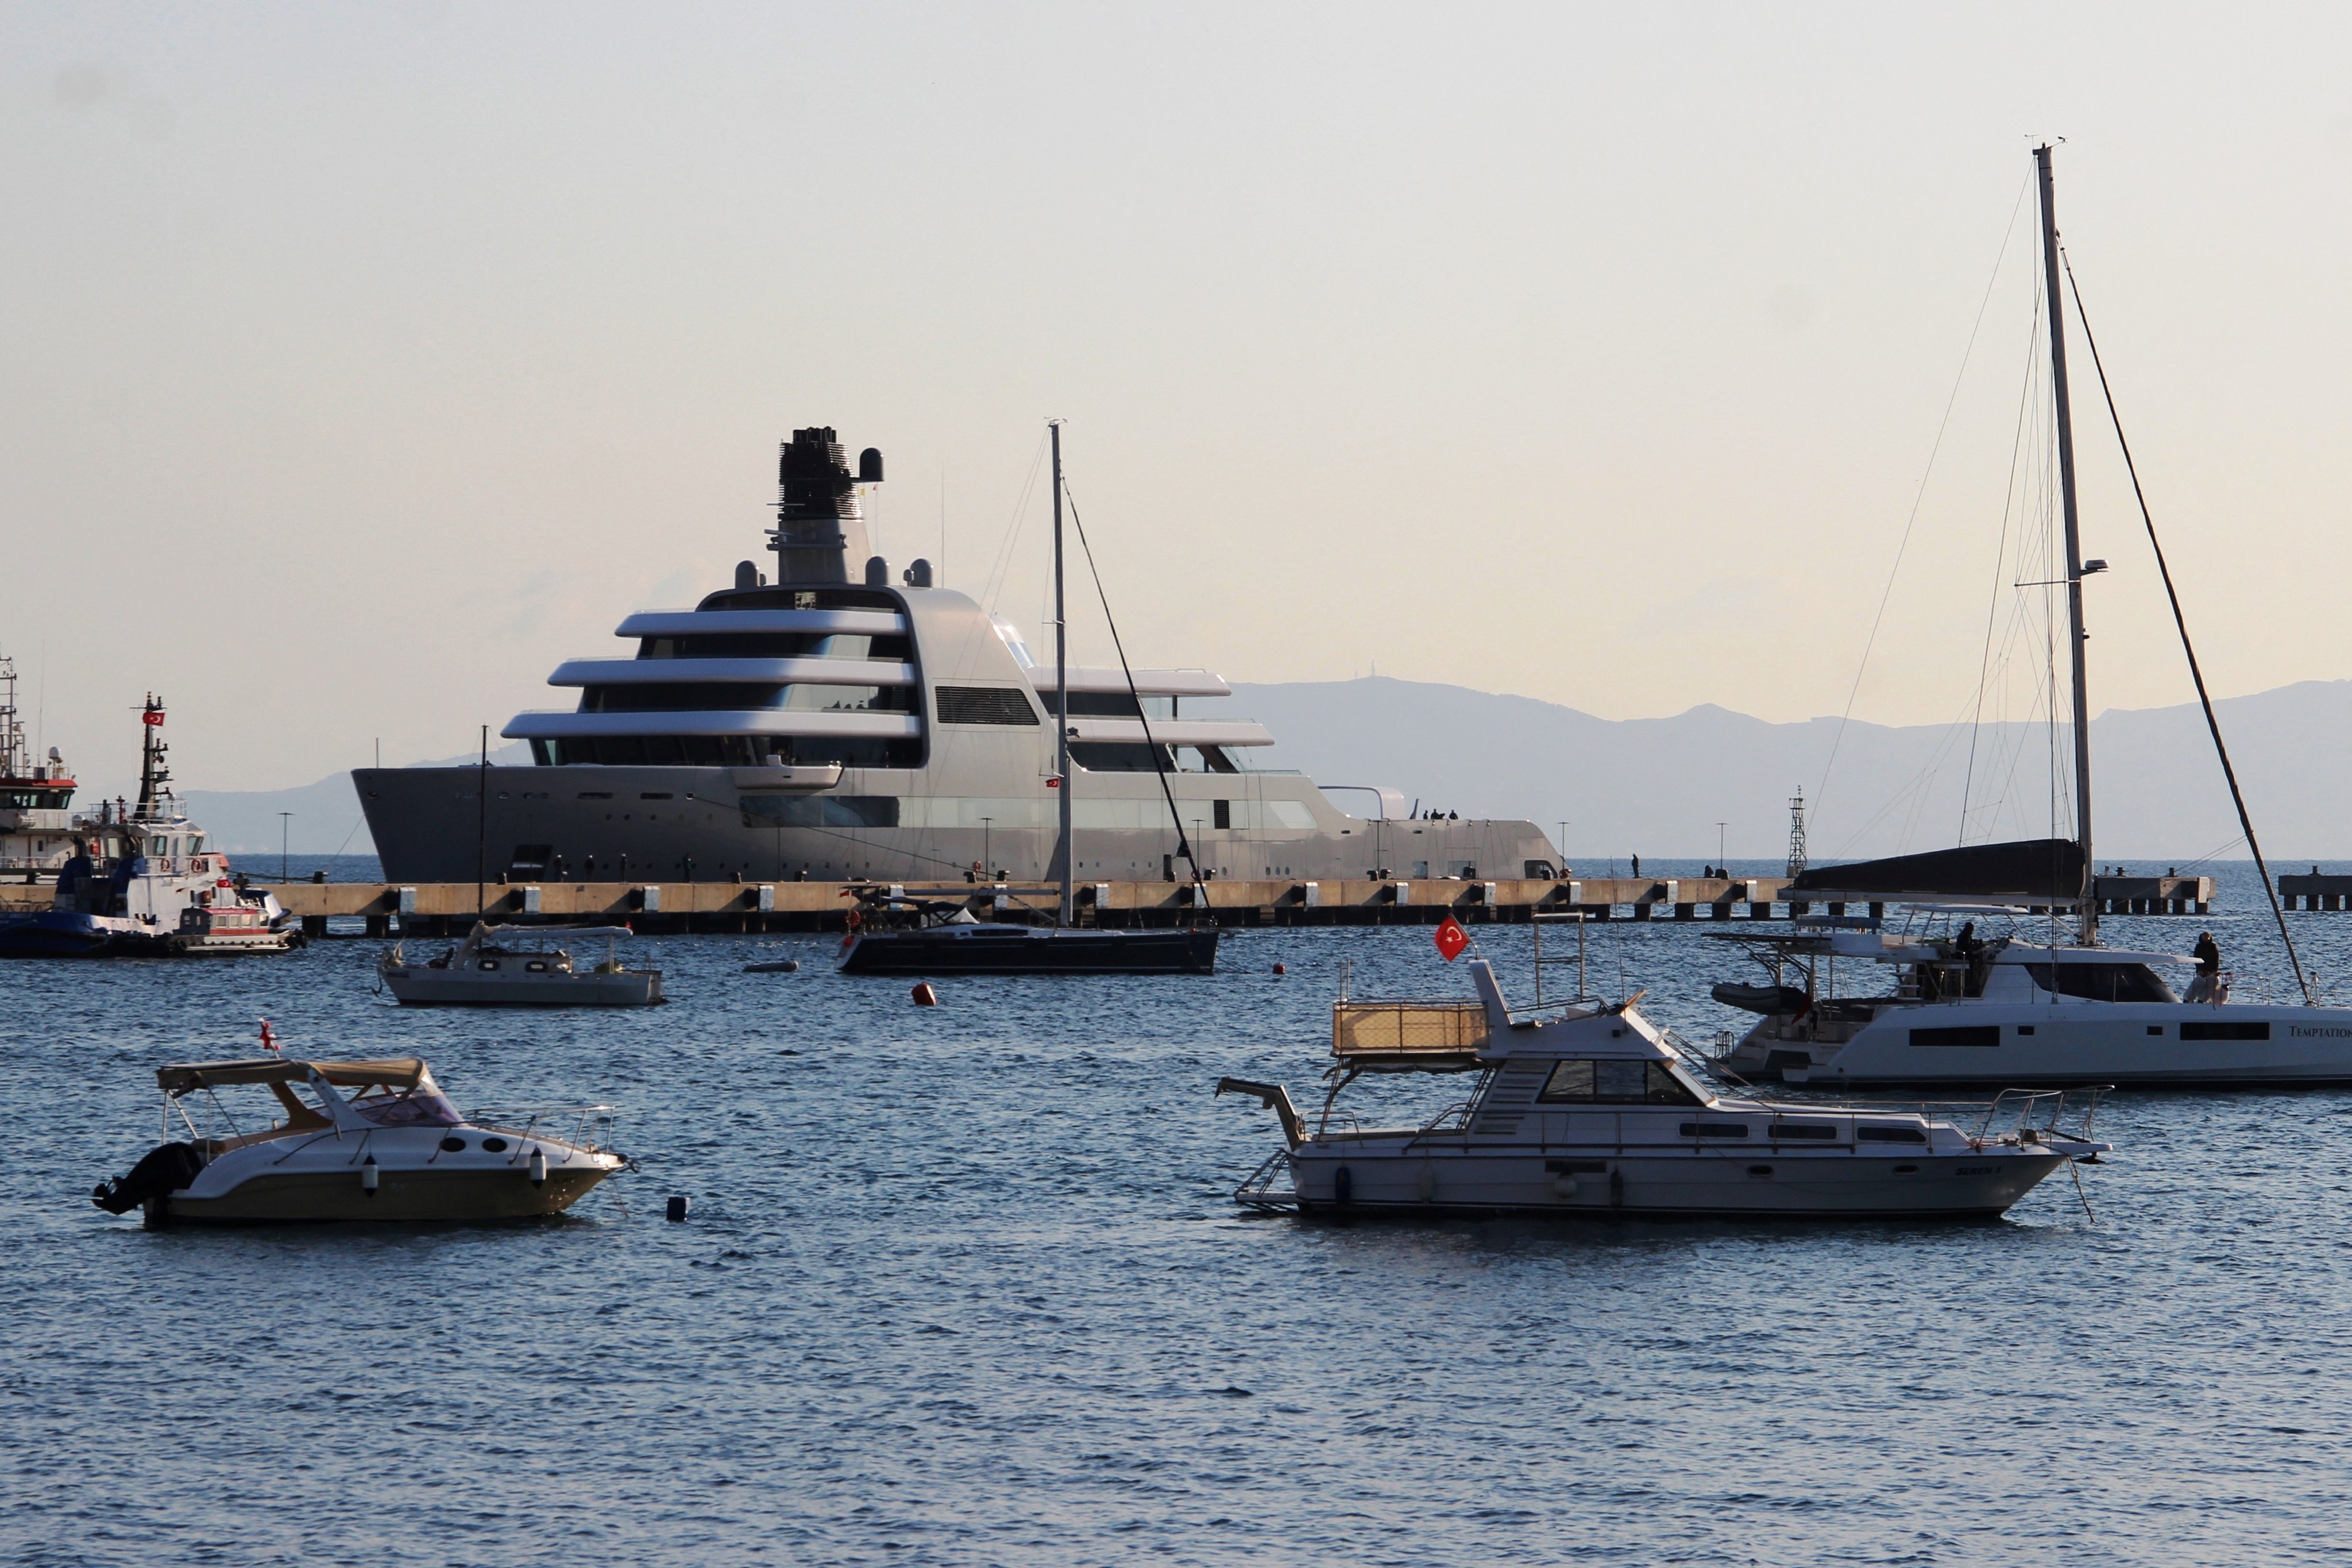 Solaris, a superyacht linked to sanctioned Russian oligarch Roman Abramovich, docks at a marina in Bodrum, Turkey on Monday. Photo: IHA via Reuters